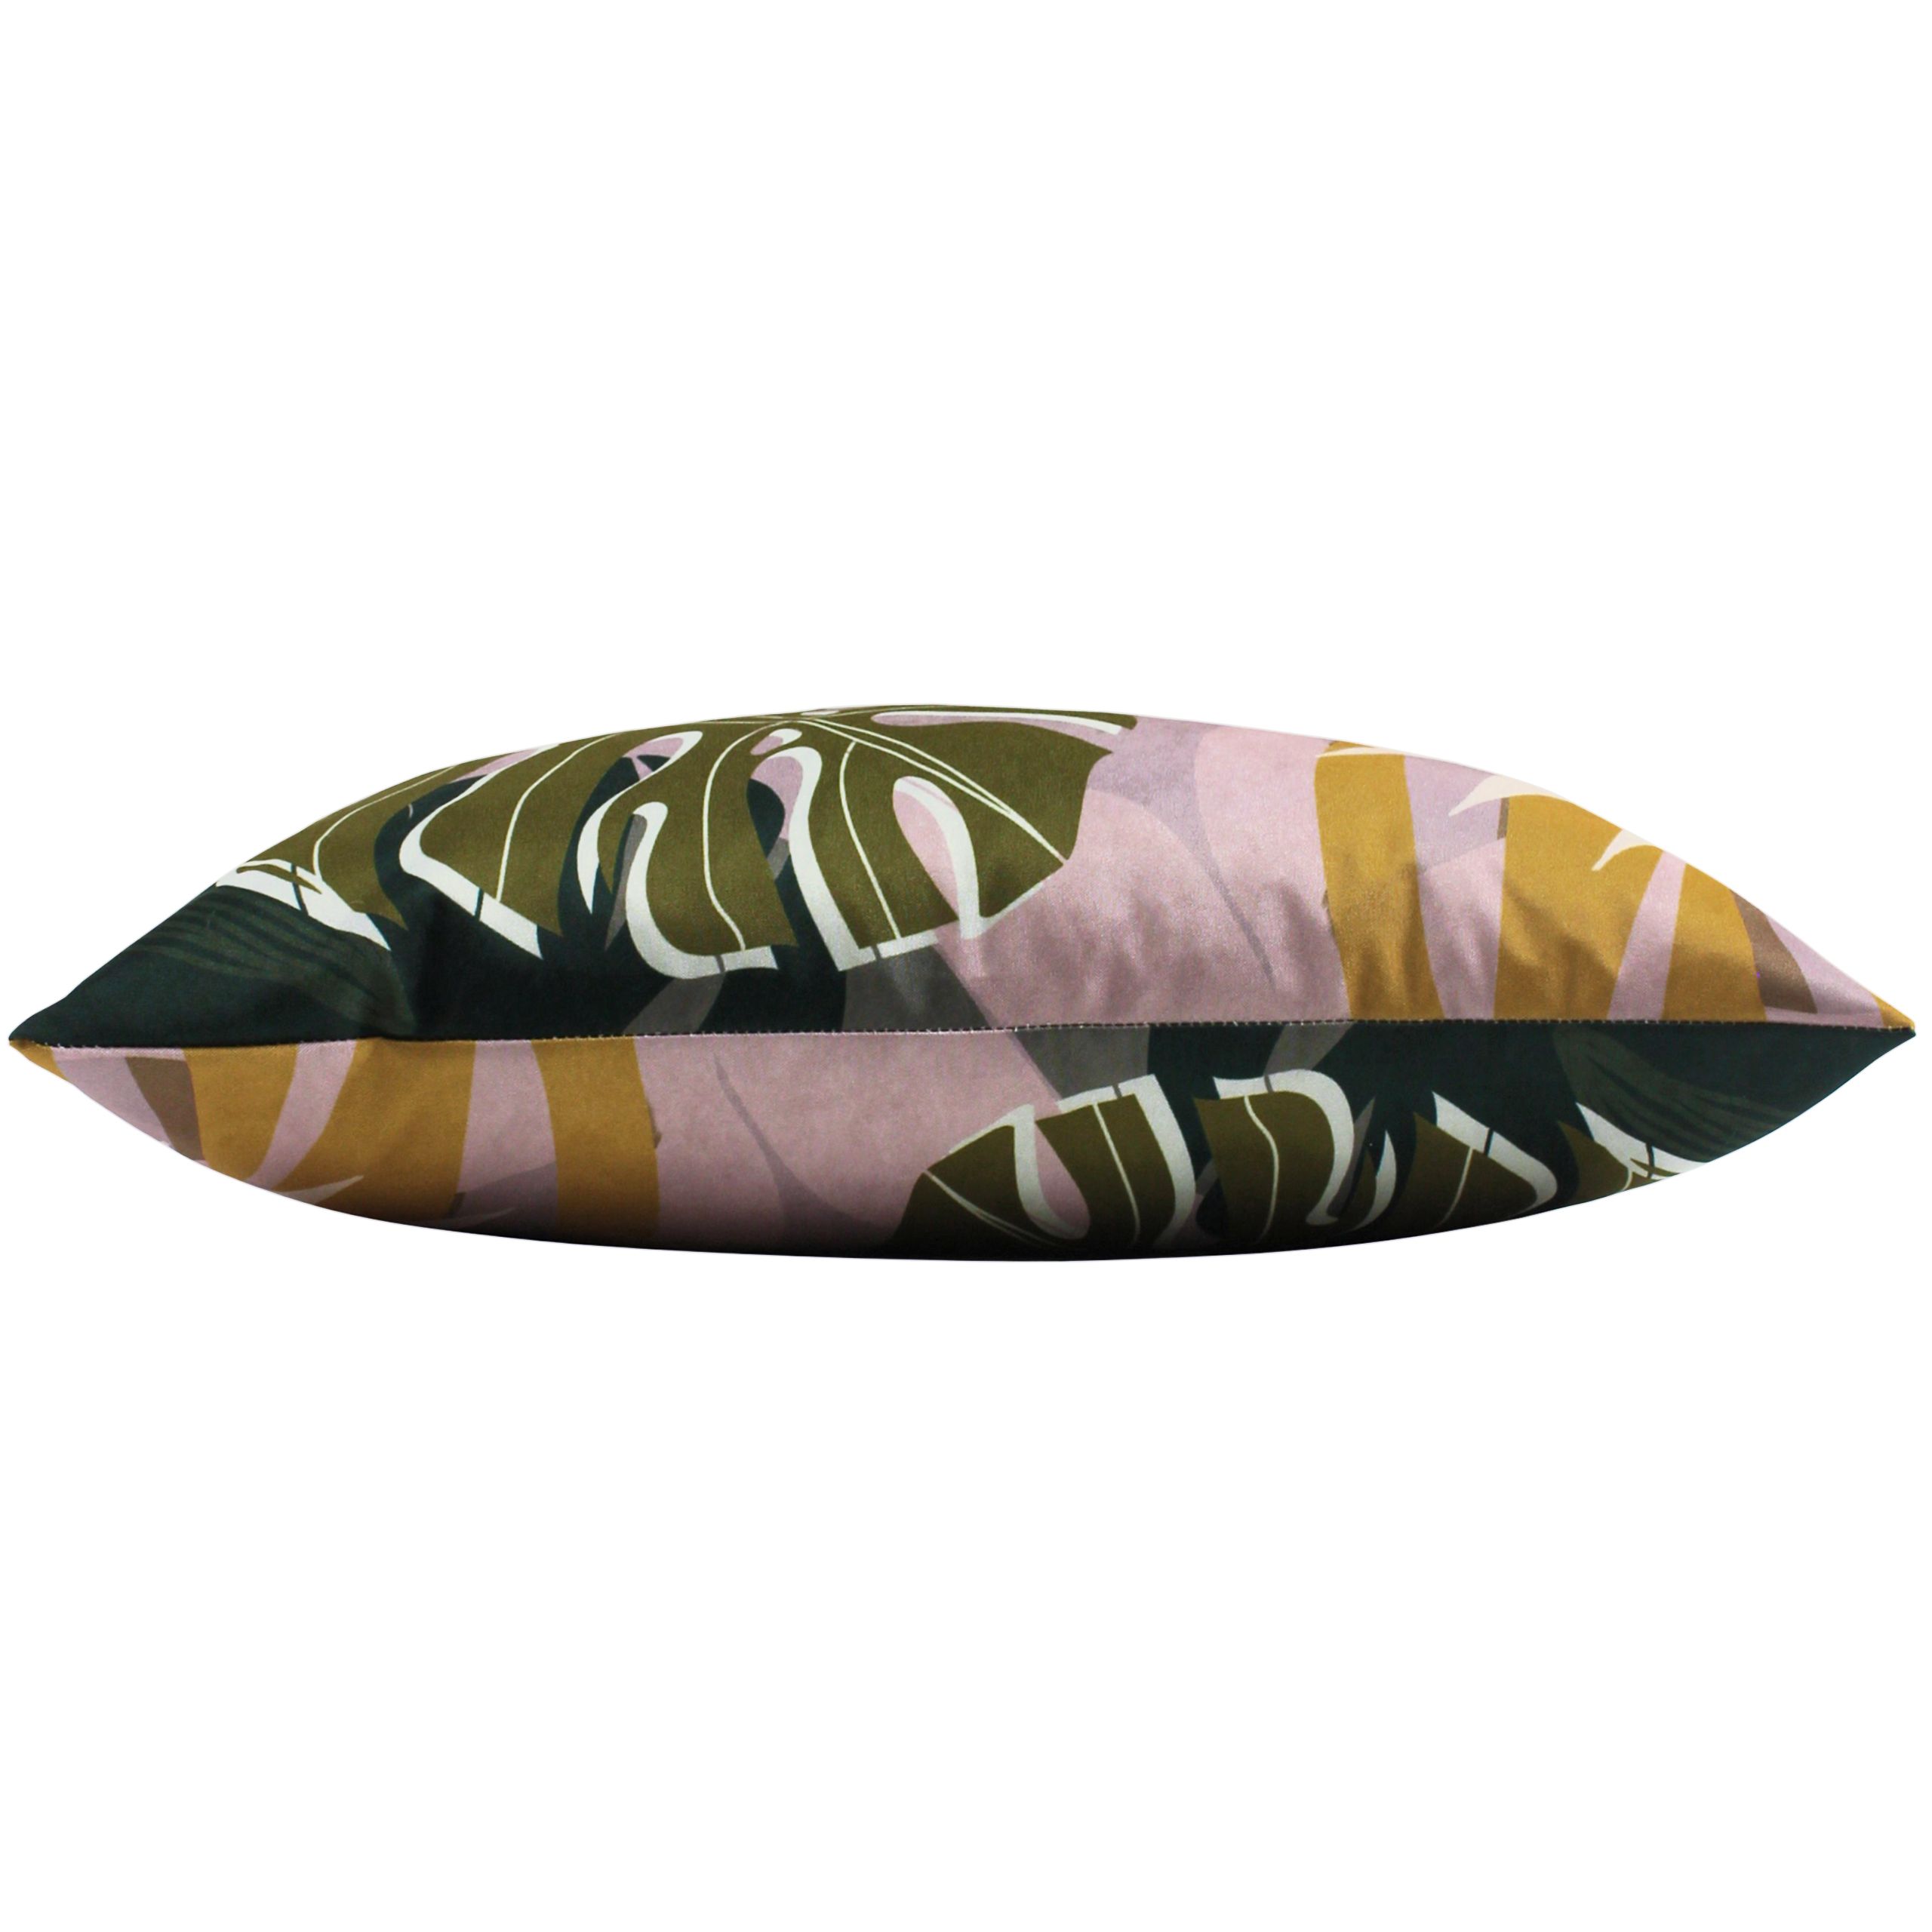 Featuring a bold and abstract design of palm leaves. This fully reversible design in muted blush pinks and olive green's will instantly freshen up your outdoor space.